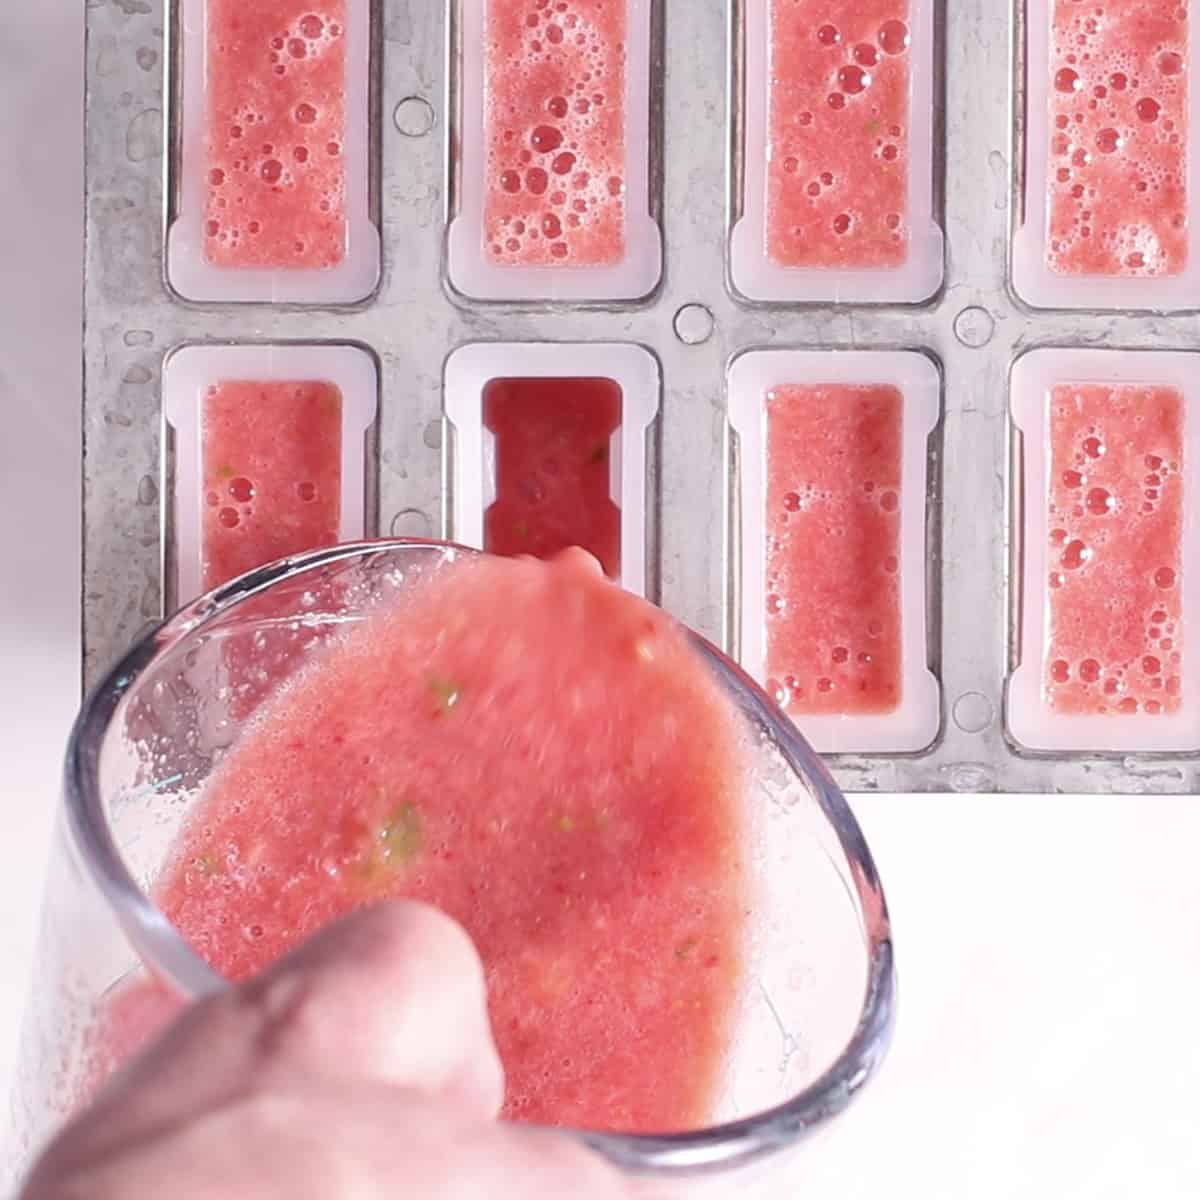 pouring watermelon popsicle mixture into mold